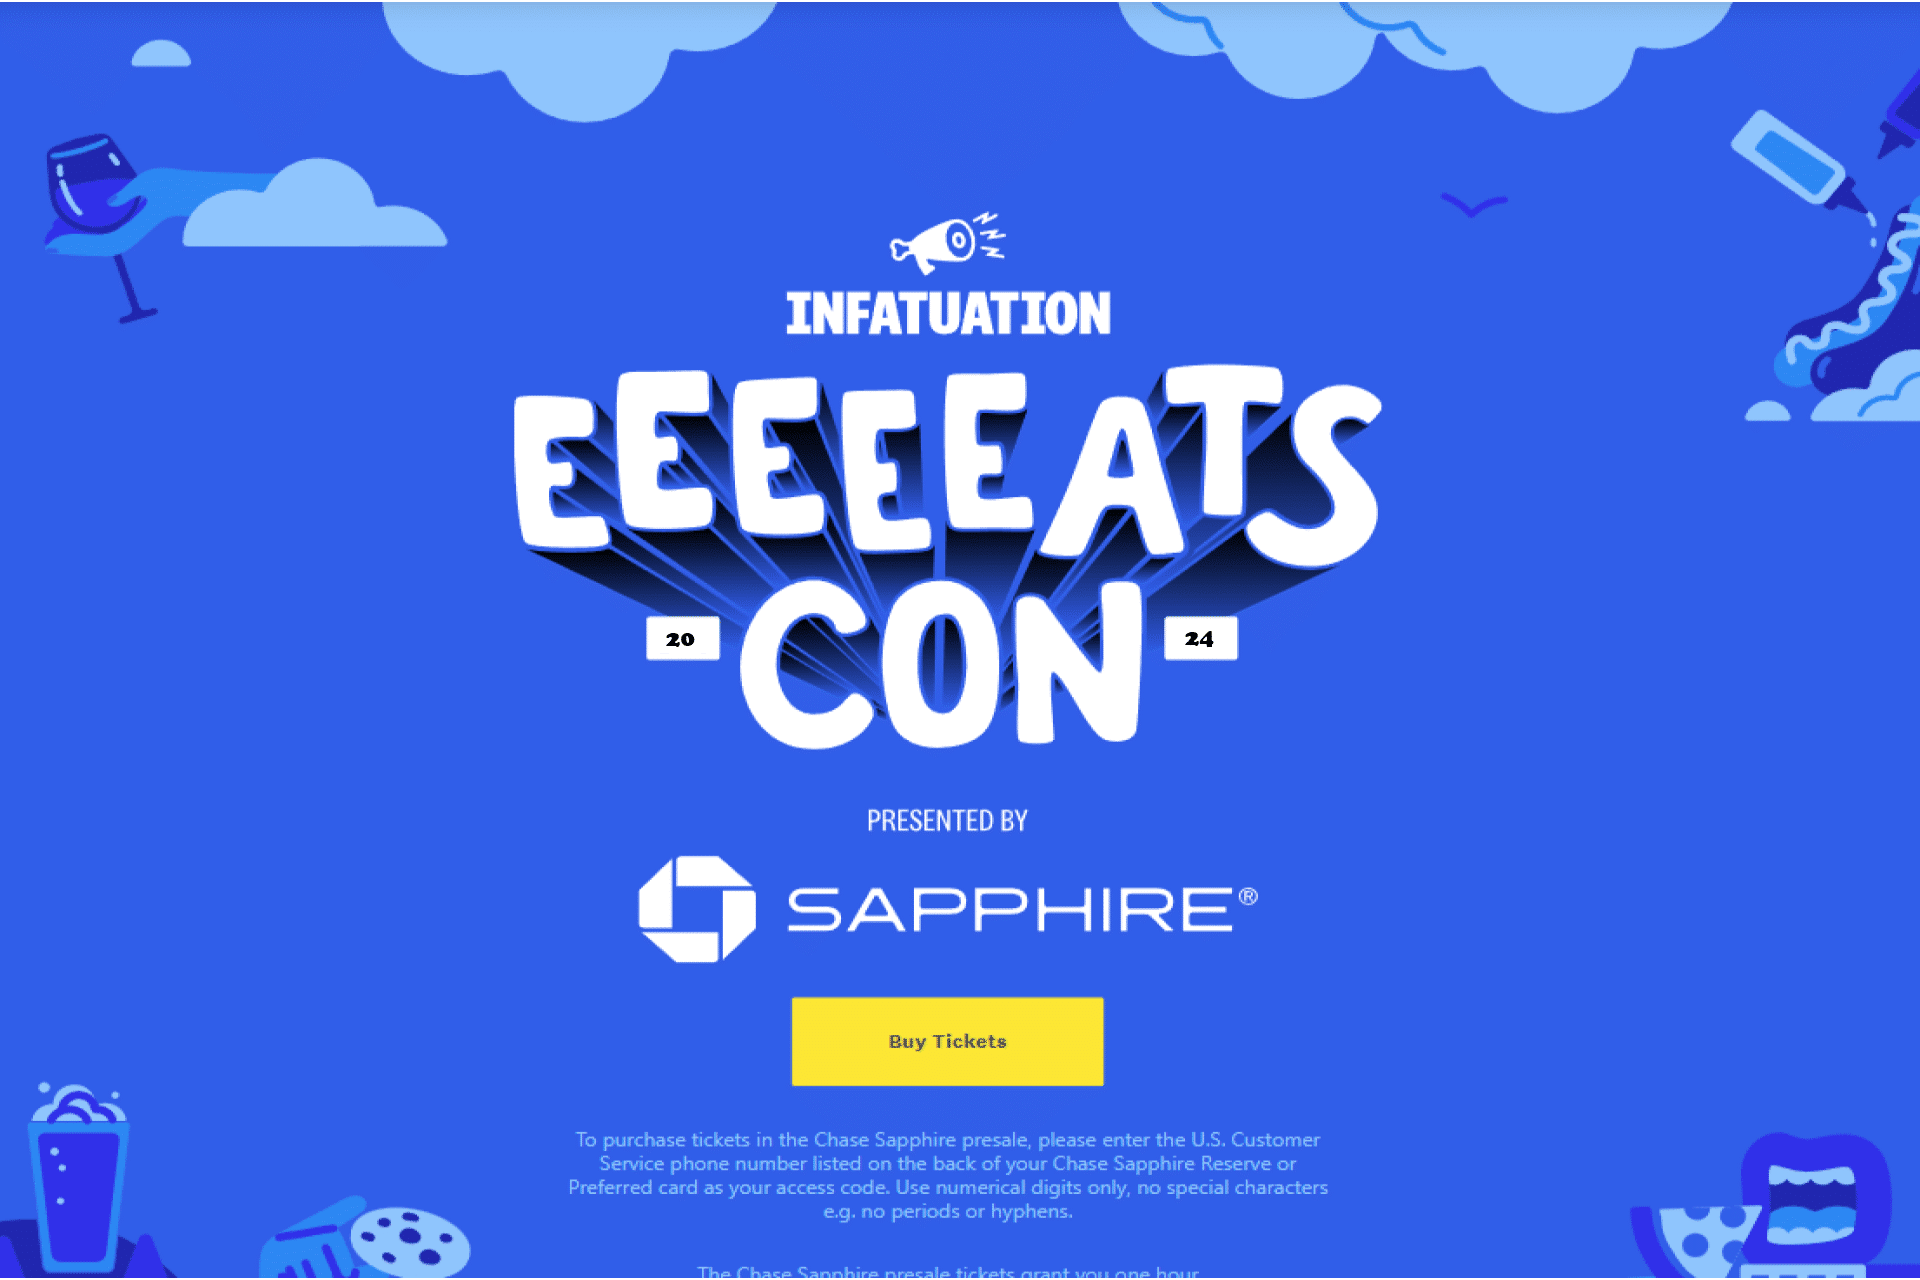 Chase announces latest EEEEEATSCON event for May